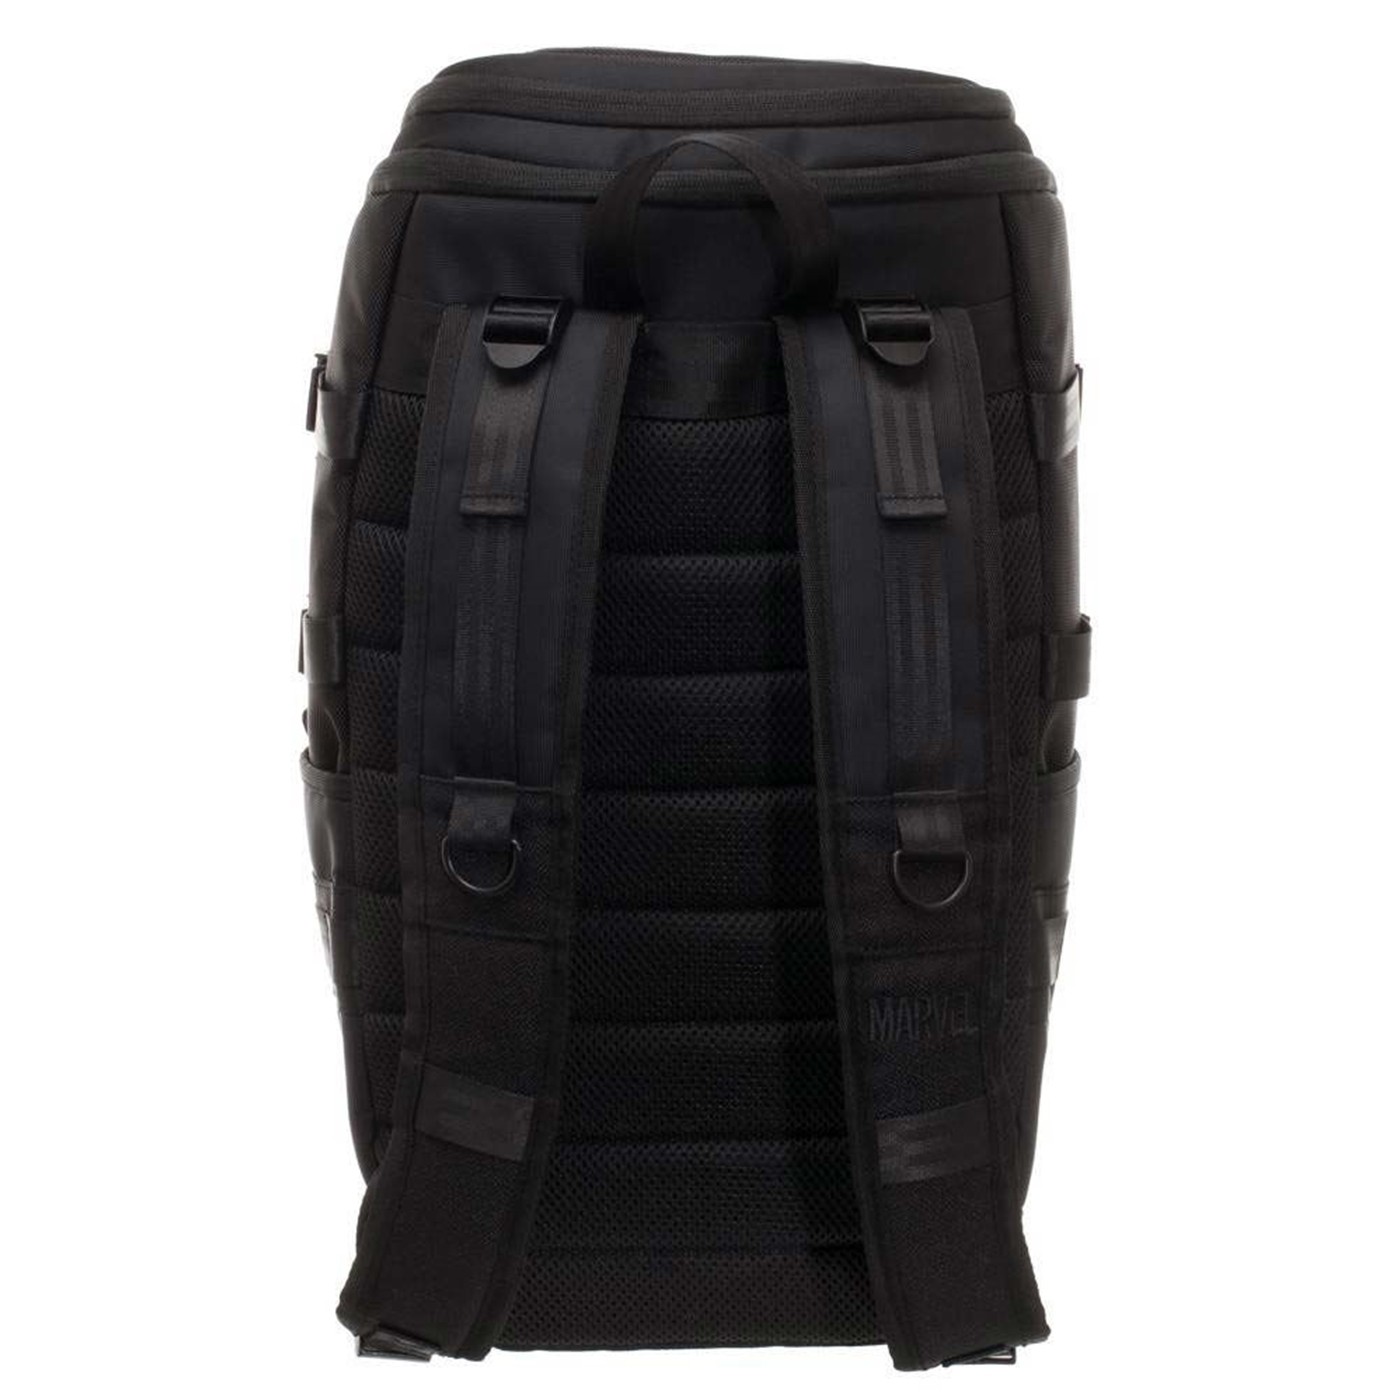 Deadpool Tactical Backpack - image 4 of 4